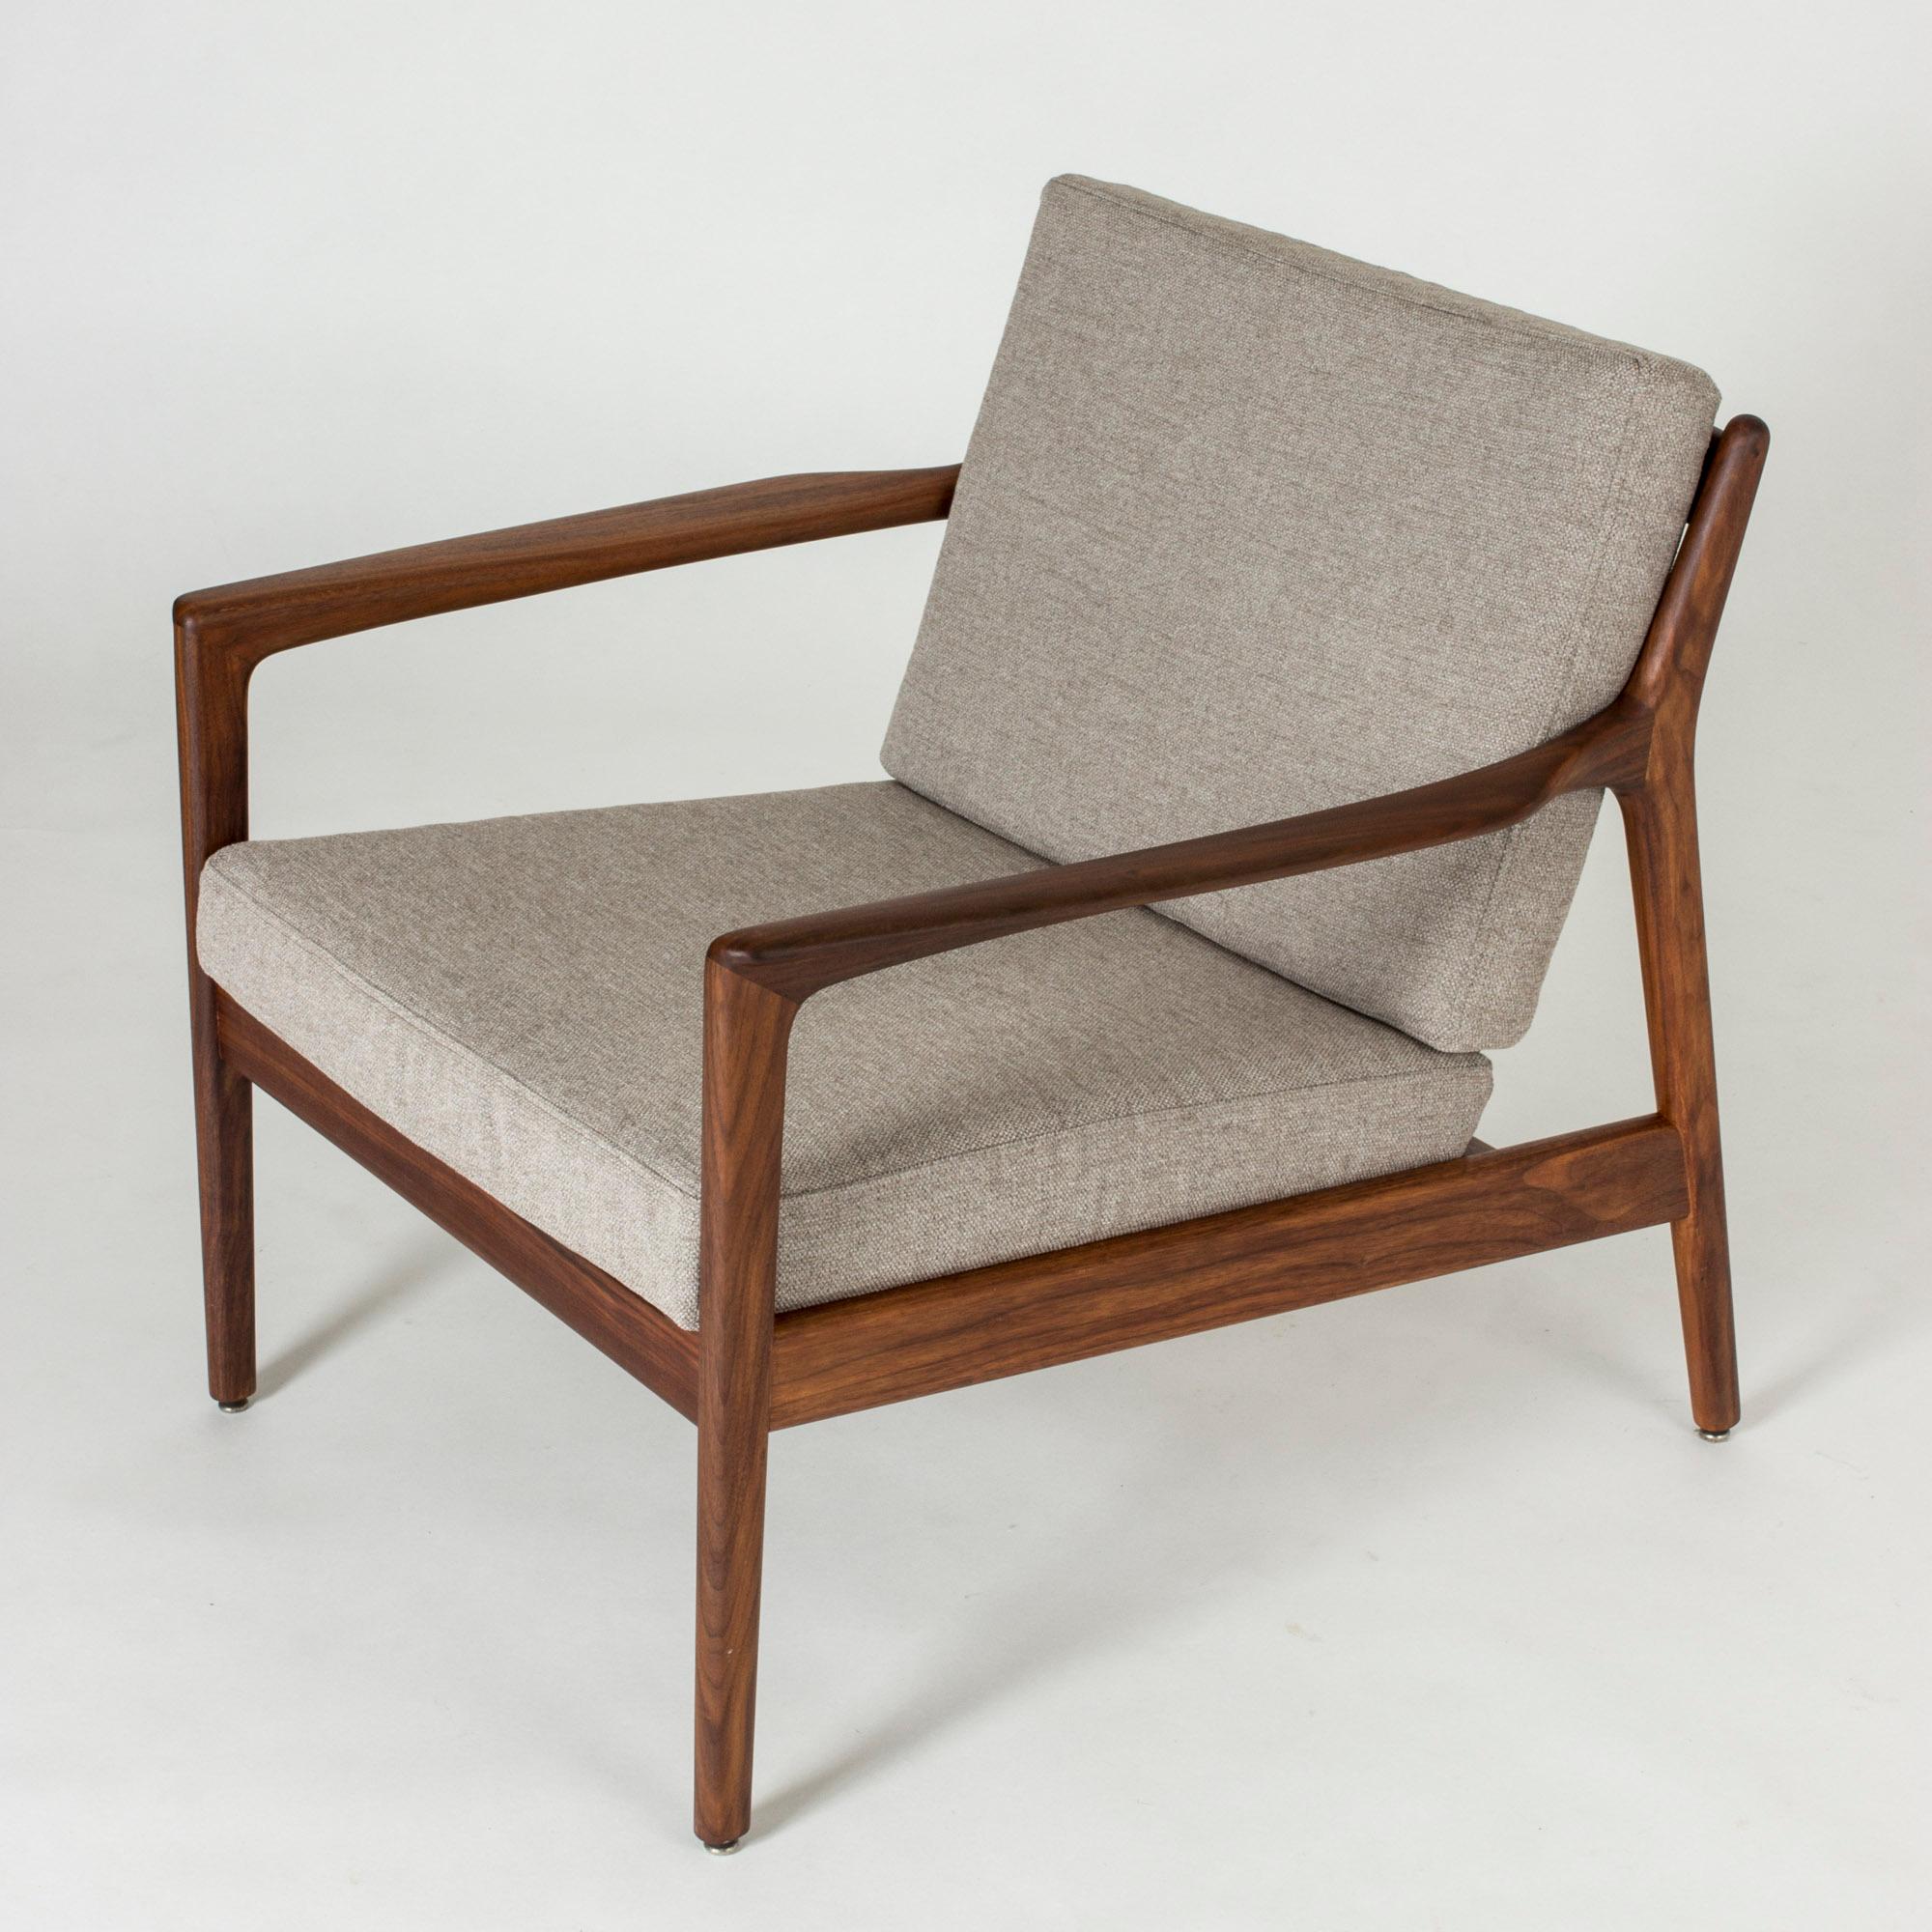 Mid-20th Century Pair of “USA 75” Teak Lounge Chairs by Folke Ohlsson for DUX, Sweden, 1960s